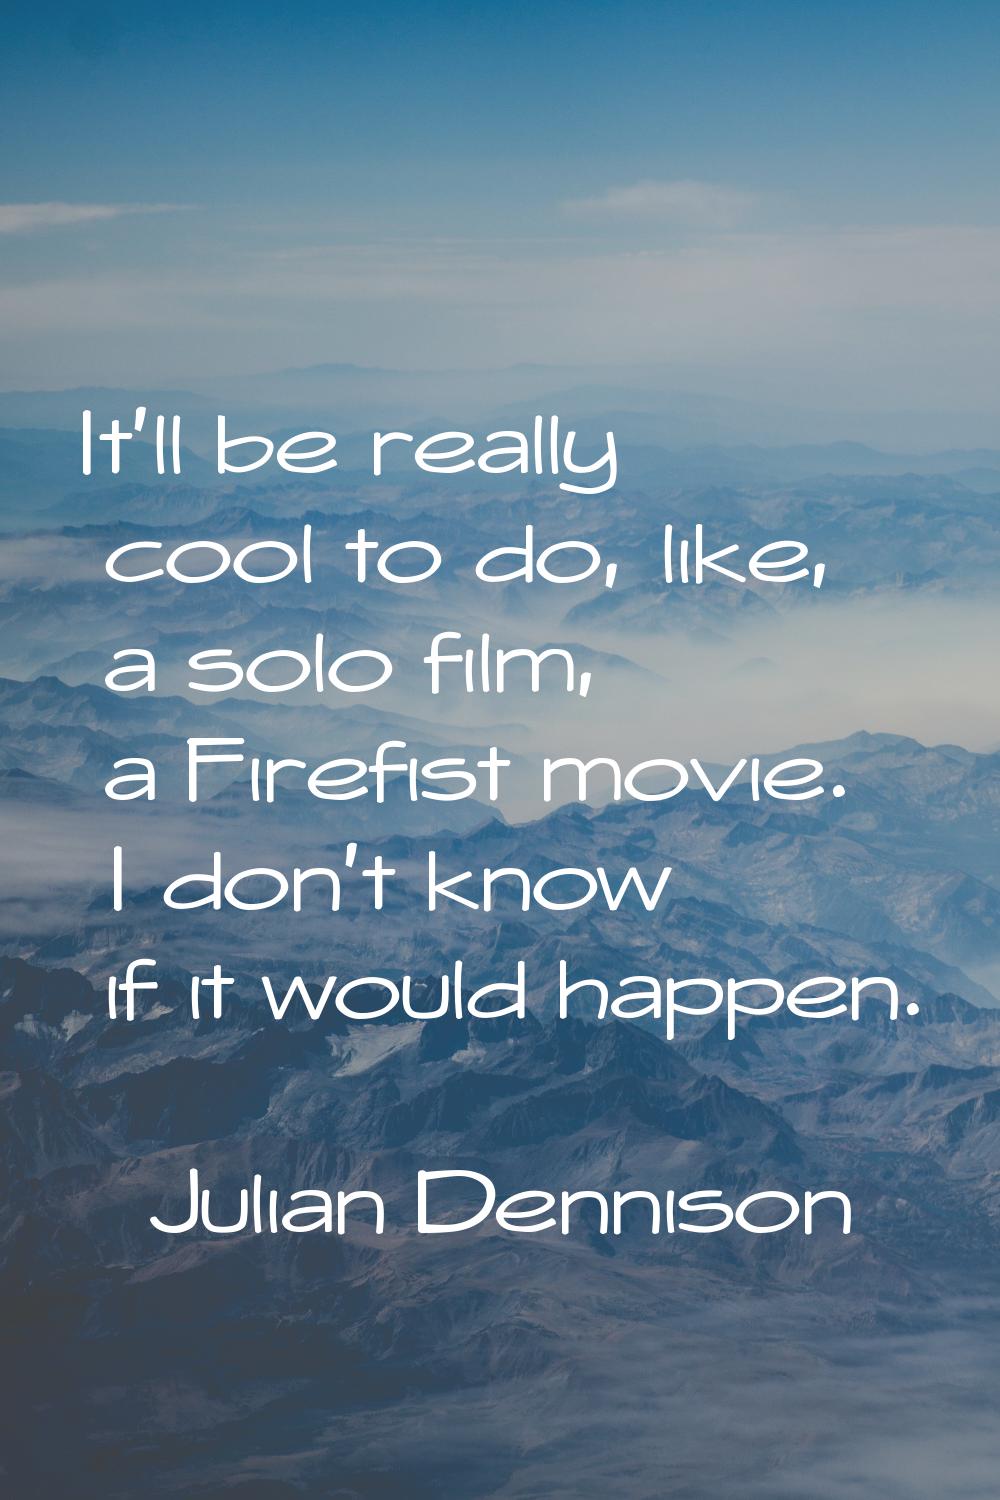 It'll be really cool to do, like, a solo film, a Firefist movie. I don't know if it would happen.